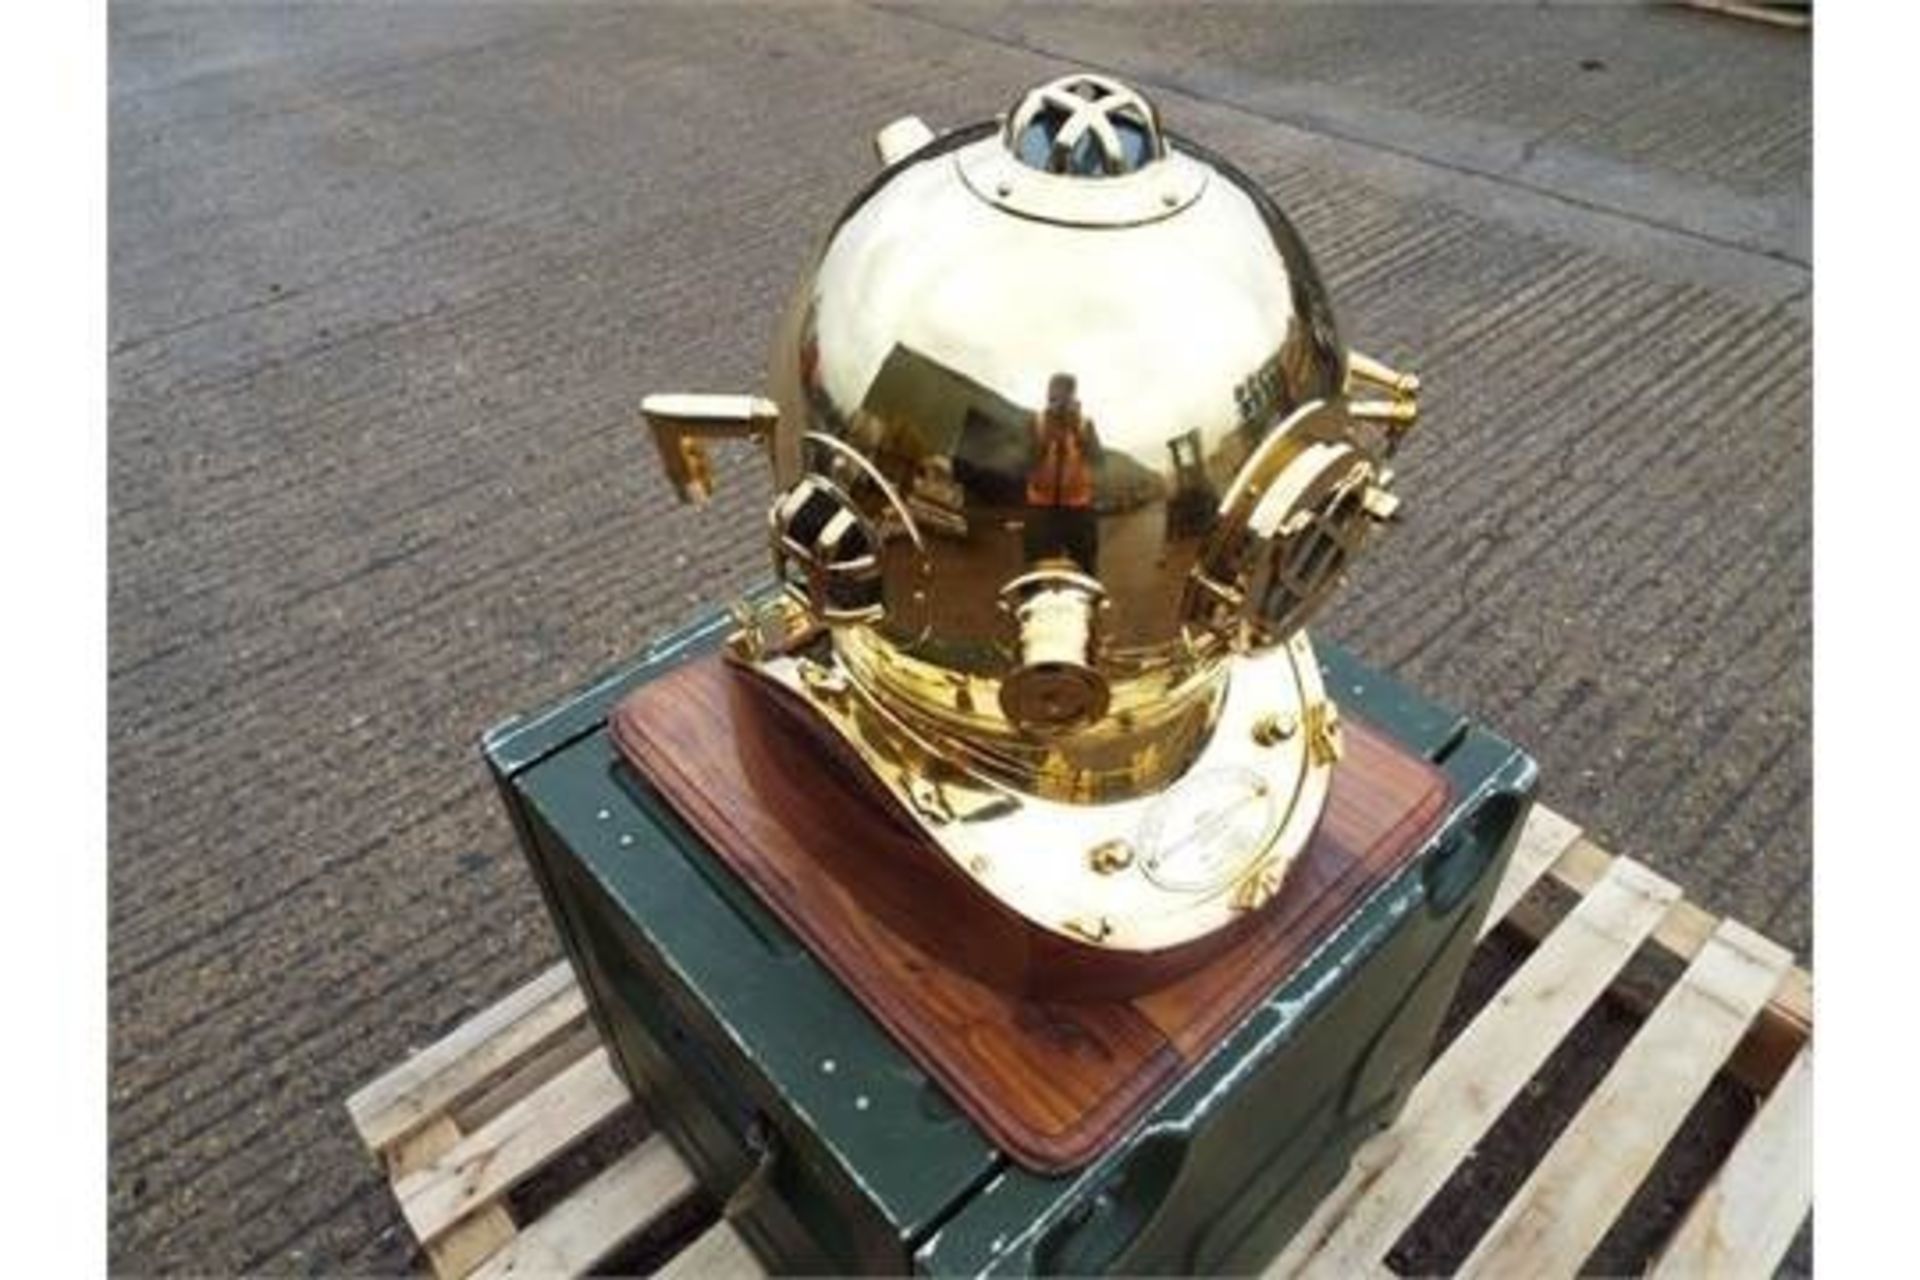 Replica Full Size U.S. Navy Mark V Brass Diving Helmet on Wooden Display Stand - Image 2 of 5